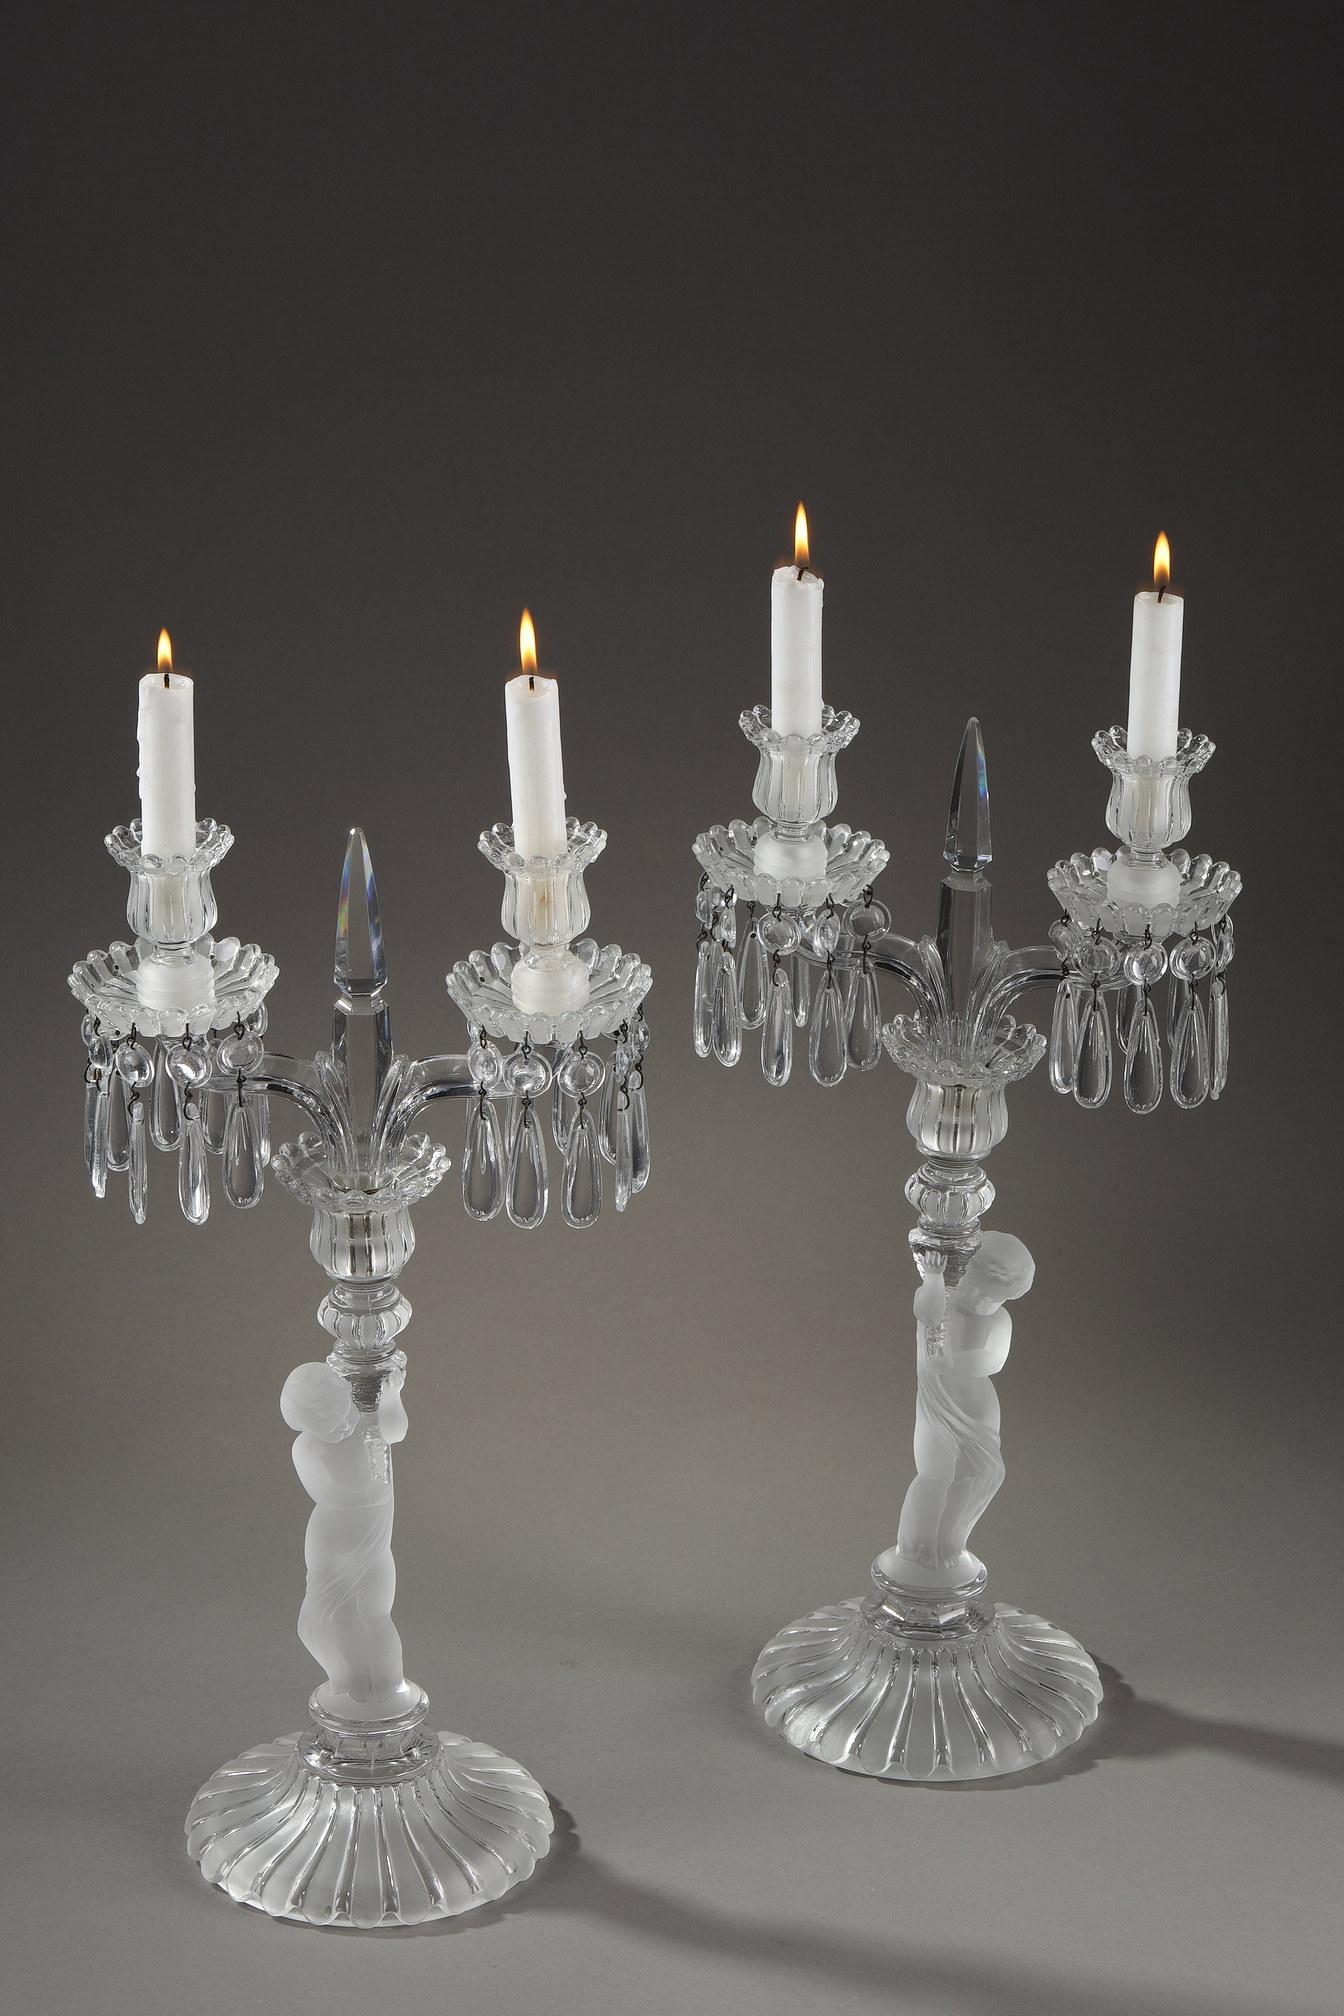 Pair of Candelabras in Baccarat Crystal 13